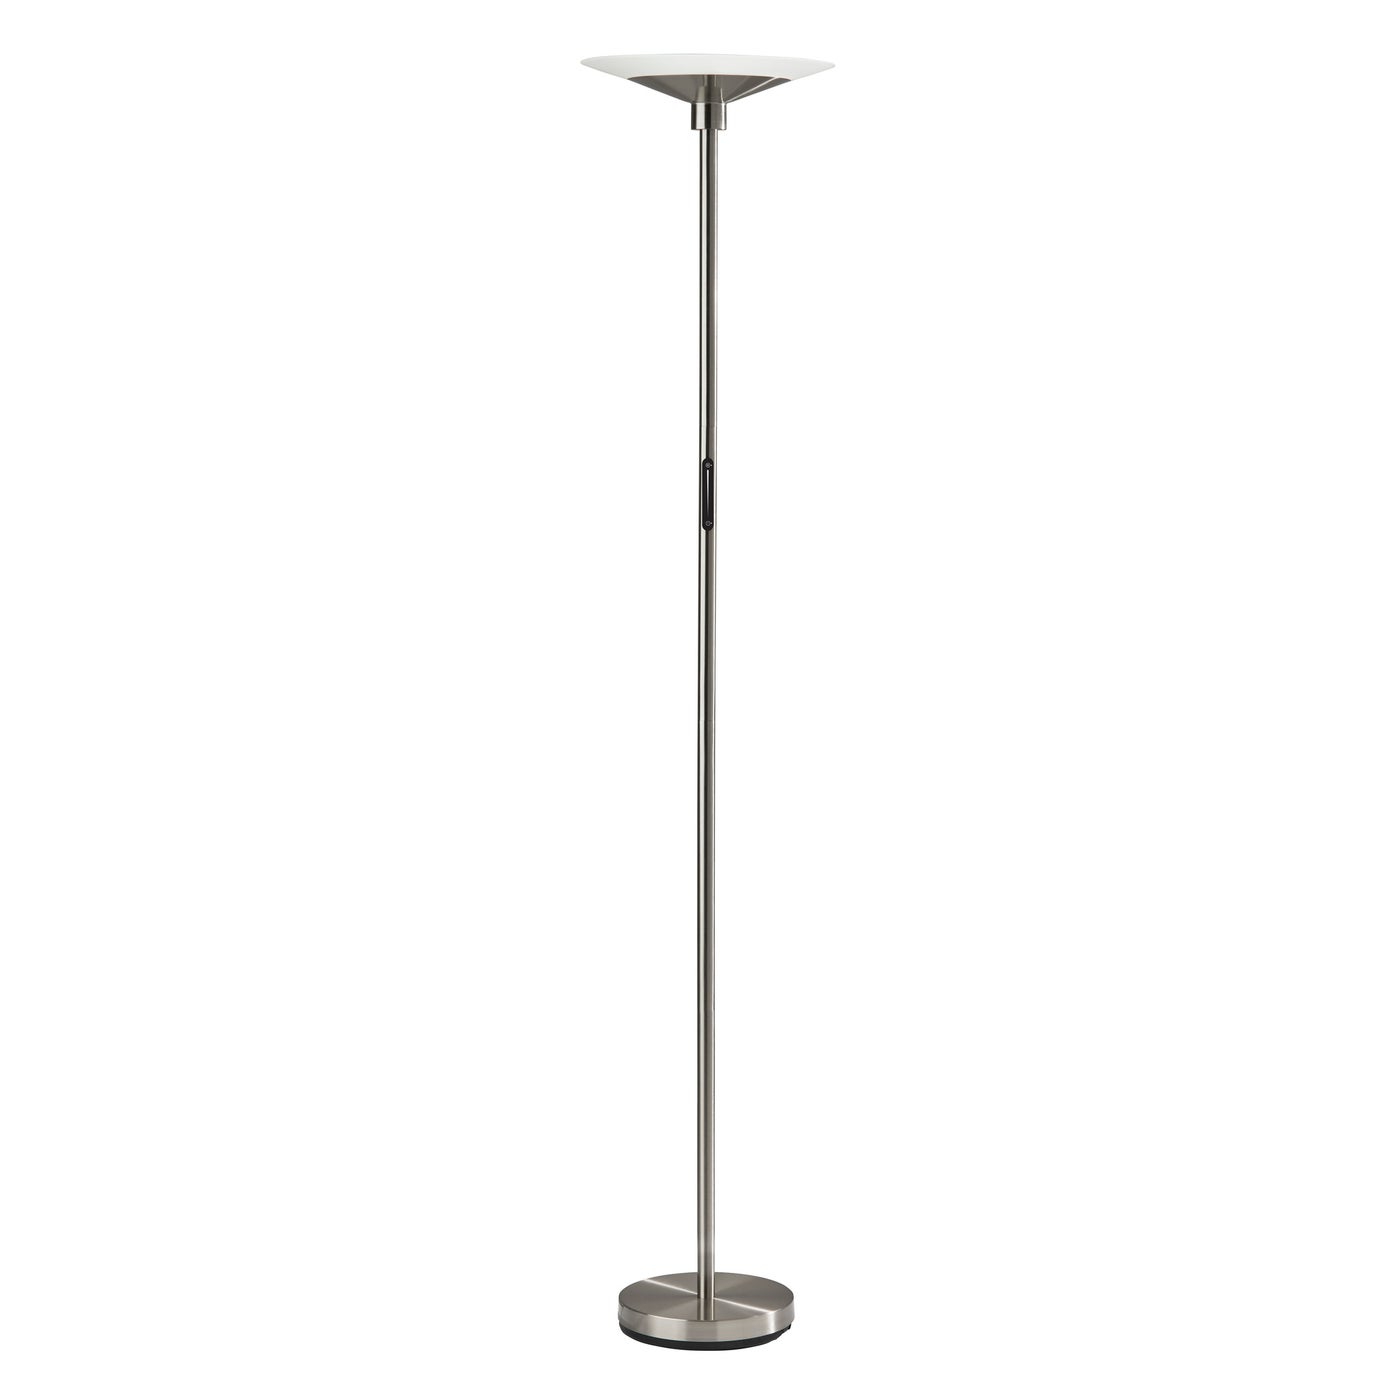 Adesso Home - 5121-22 - LED Torchiere - Solar - Brushed Steel